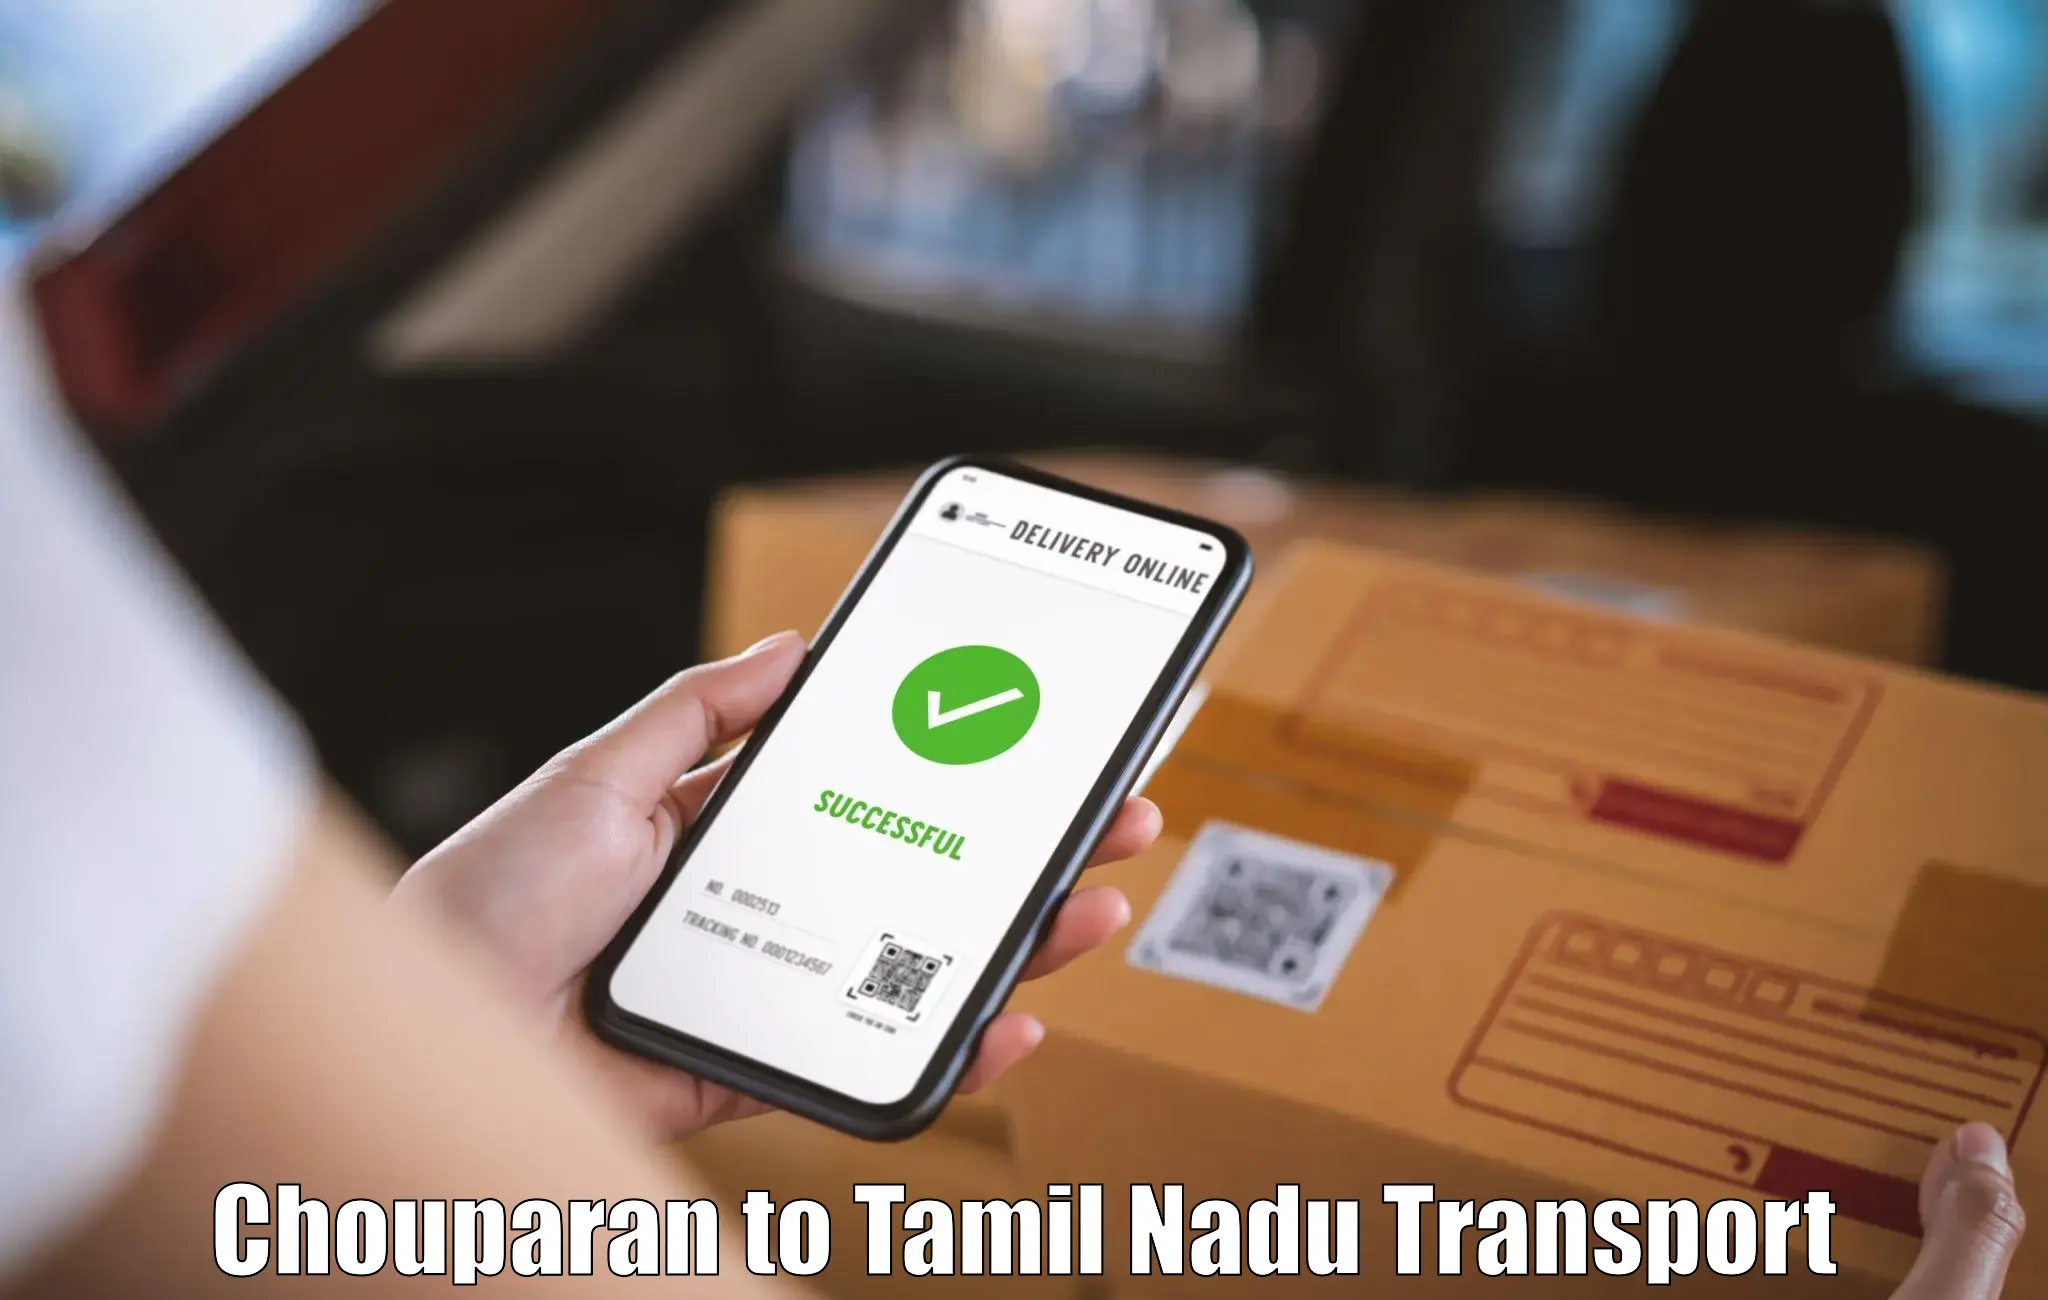 Express transport services Chouparan to Chennai